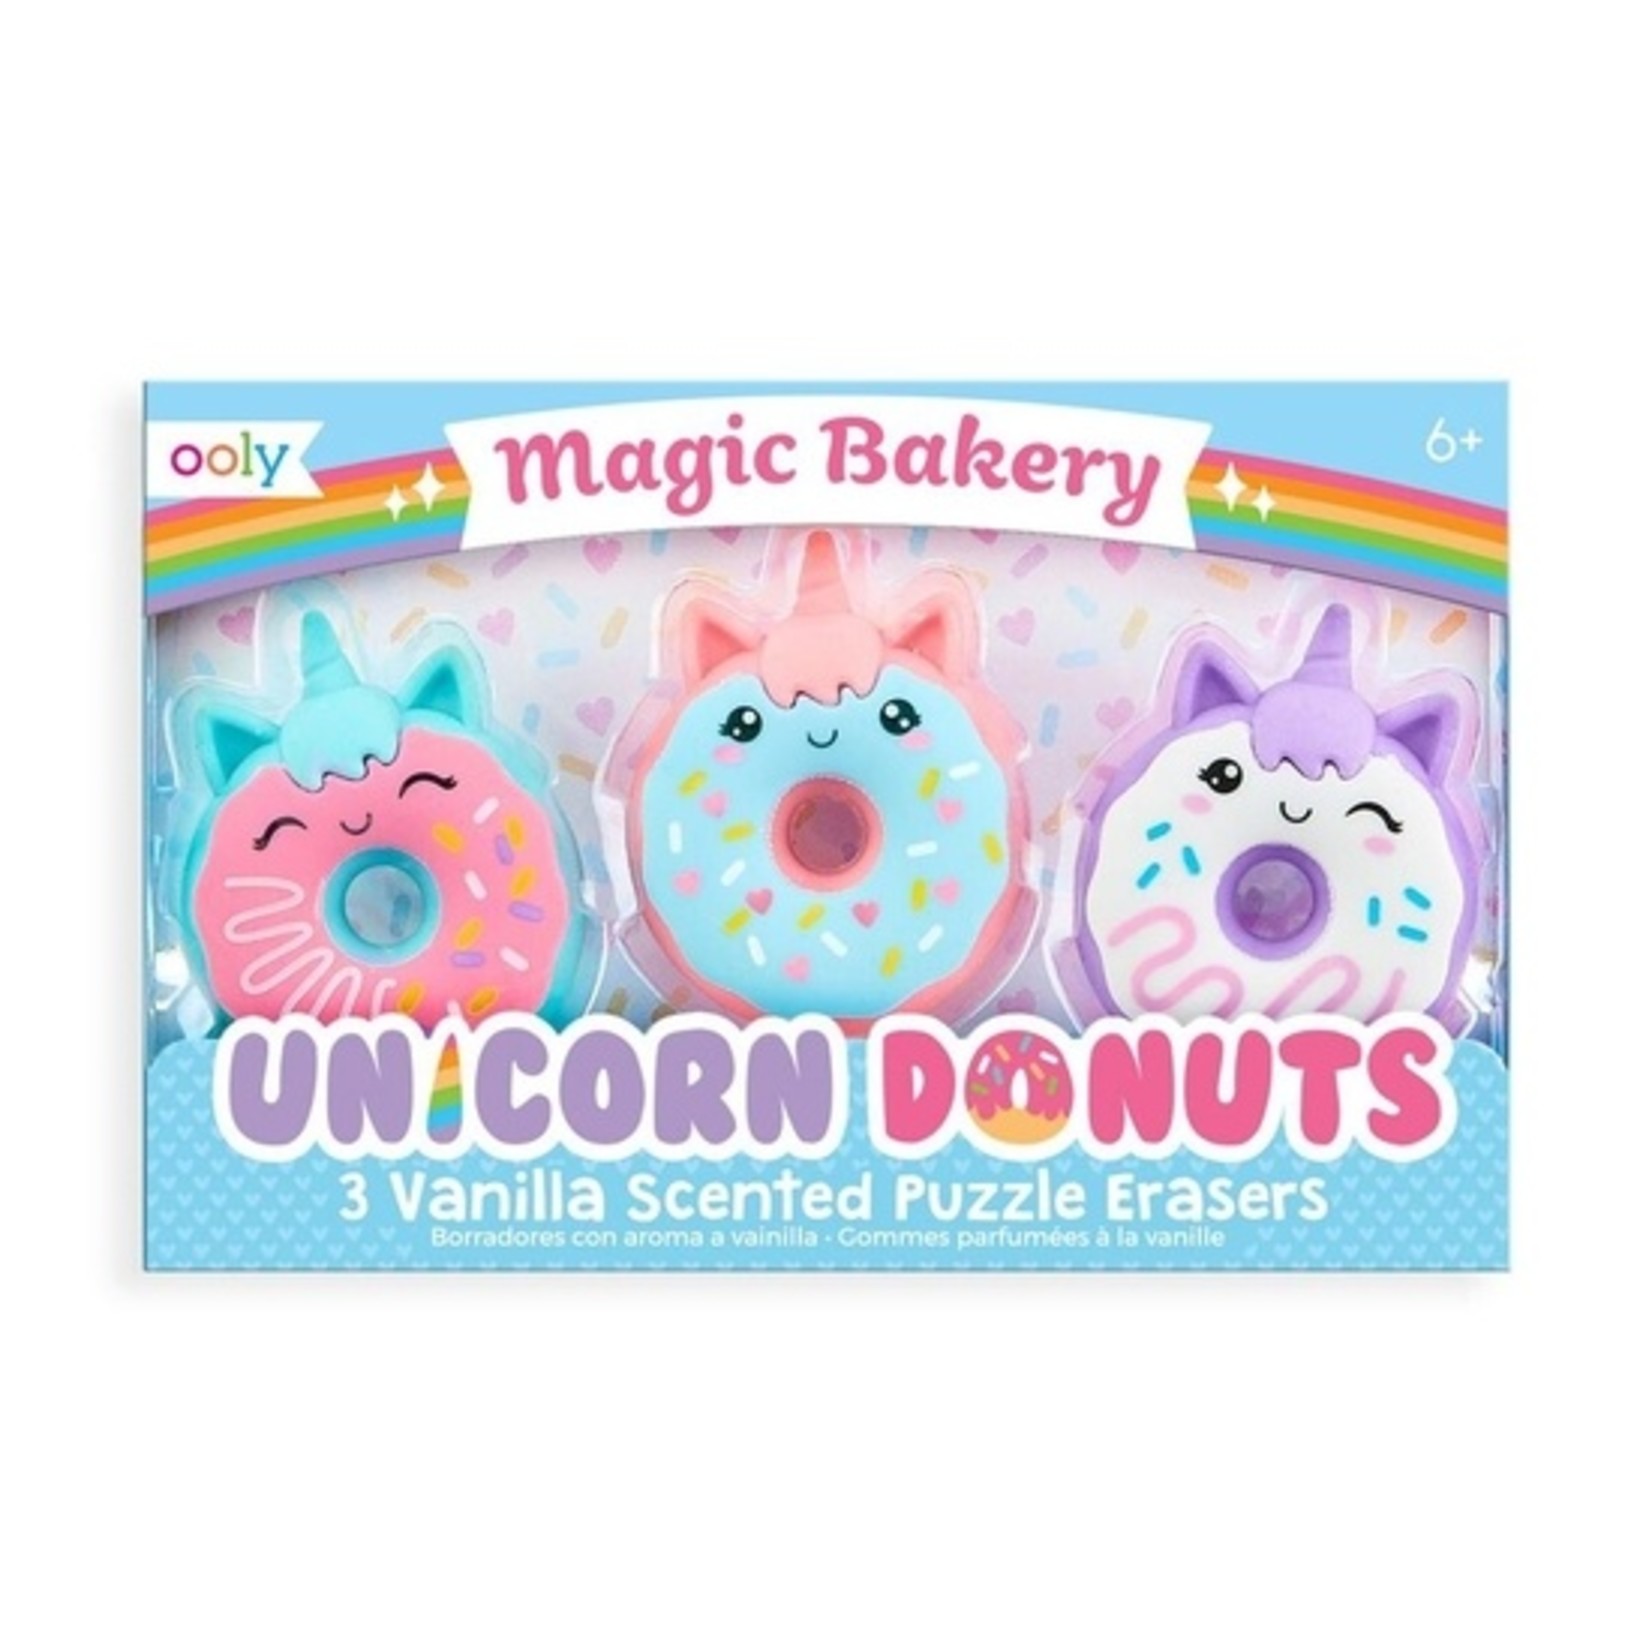 OOLY Unicorn Donuts Puzzle Erasers